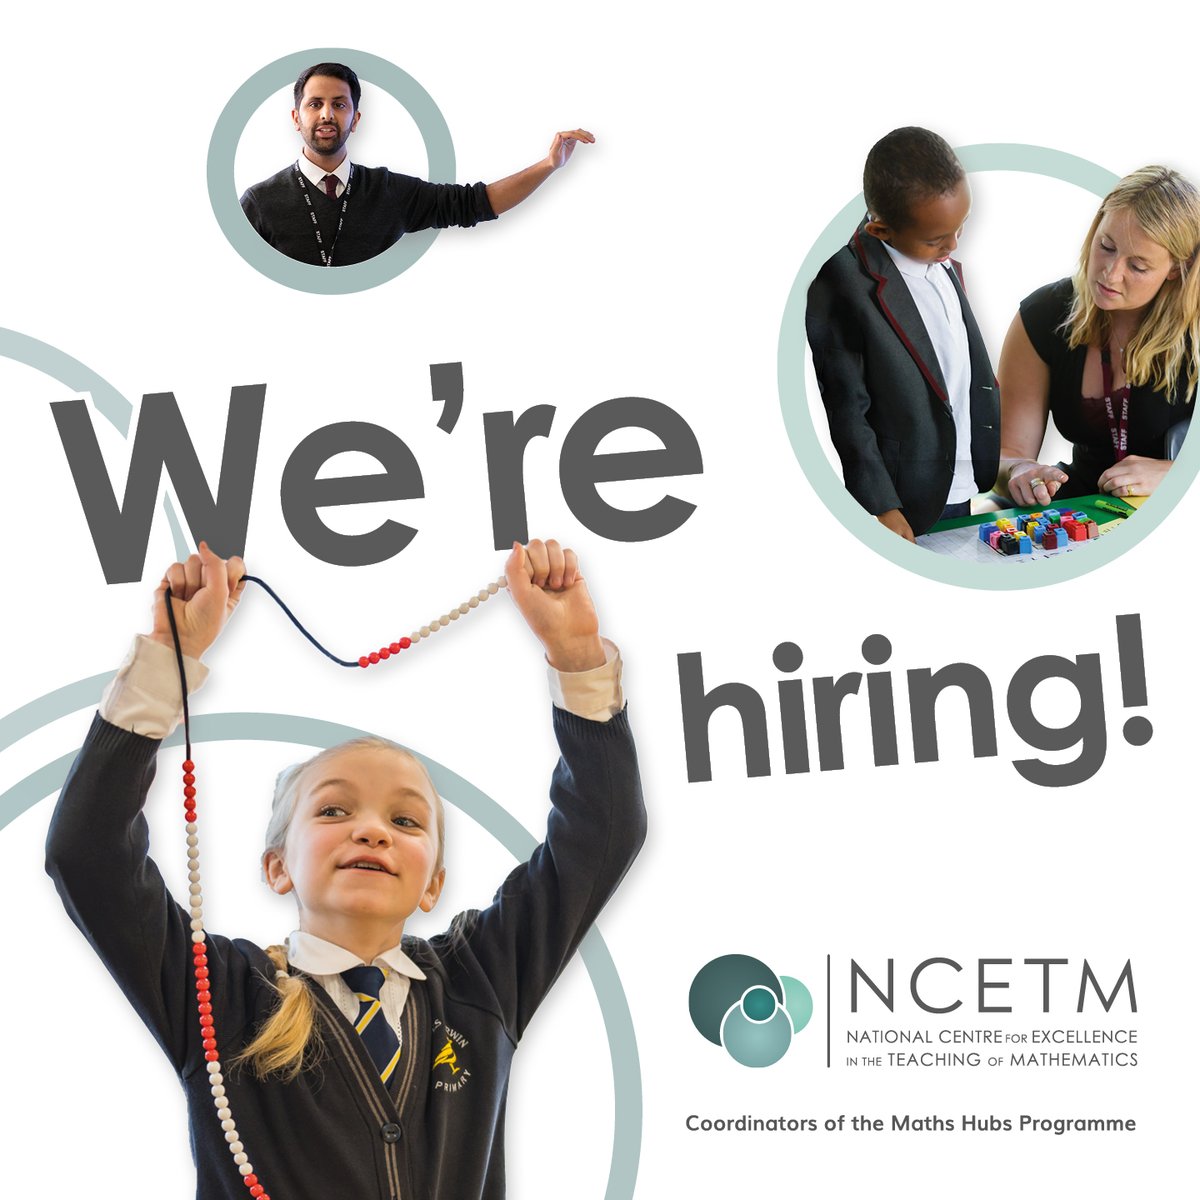 Want to come and work with us? We are looking for an Assistant Director to join our Primary Team. It could be you! Find out more and apply ncetm.org.uk/work-with-us/